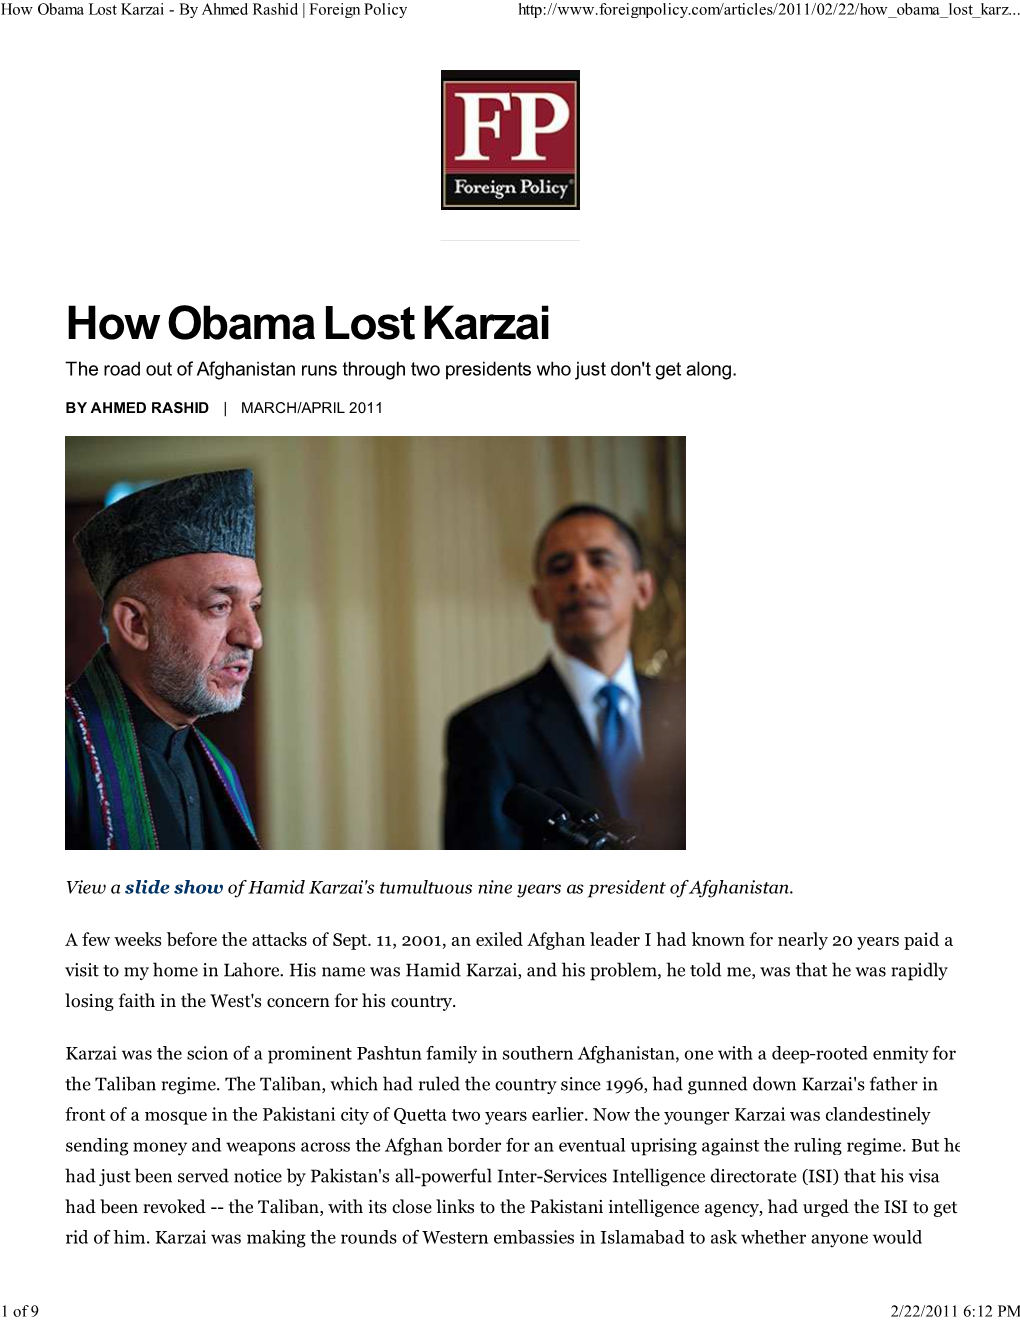 How Obama Lost Karzai - by Ahmed Rashid | Foreign Policy